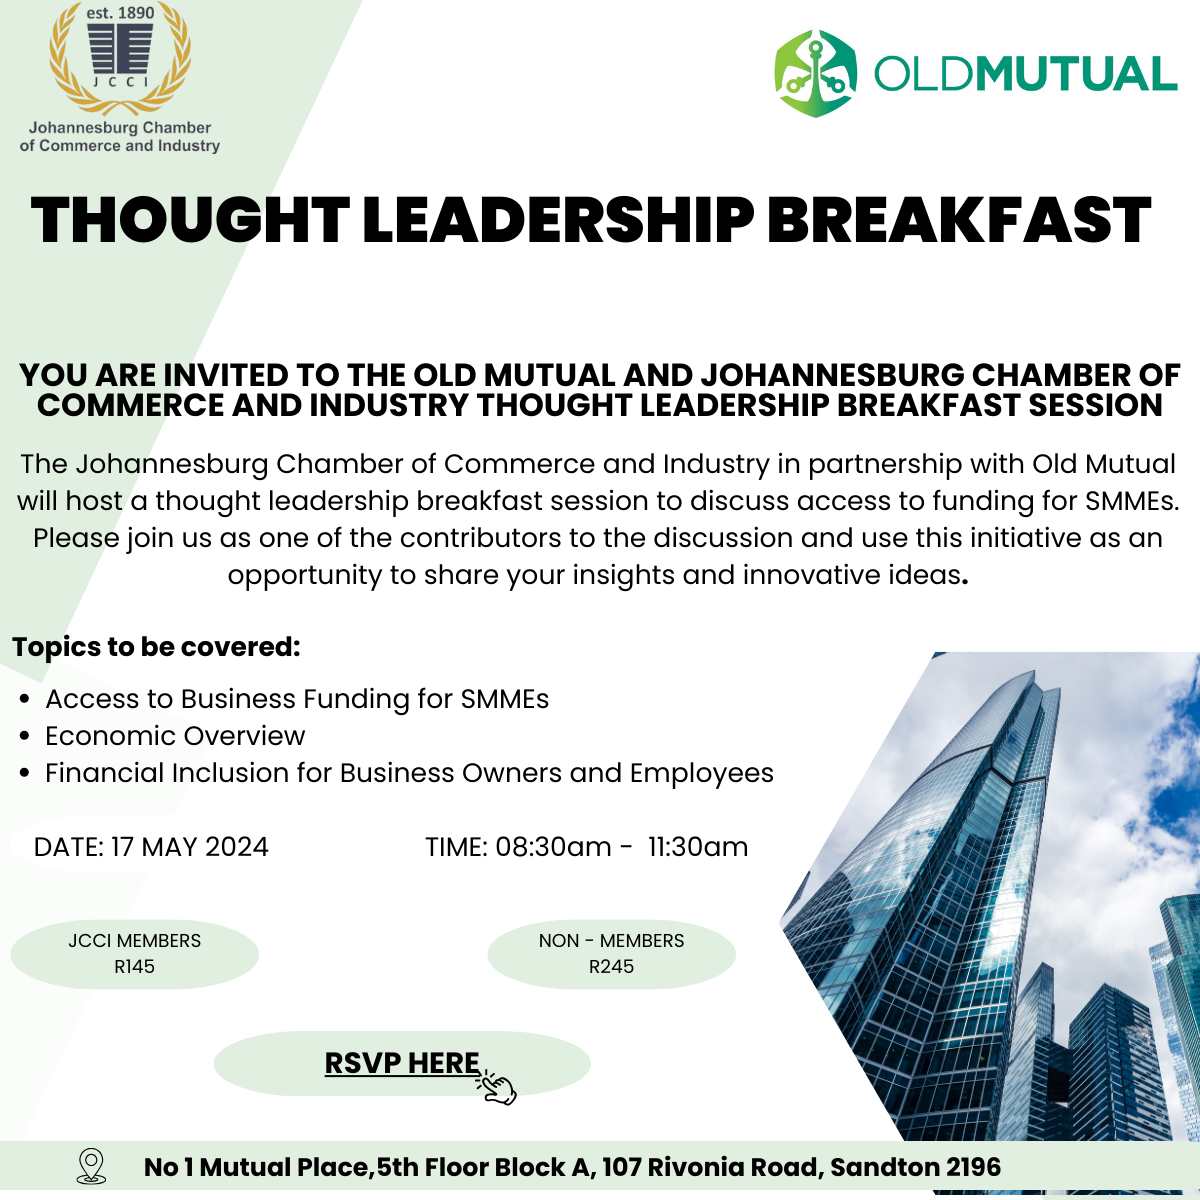 THOUGHT LEADERSHIP BREAKFAST SESSION - 17 MAY 2024